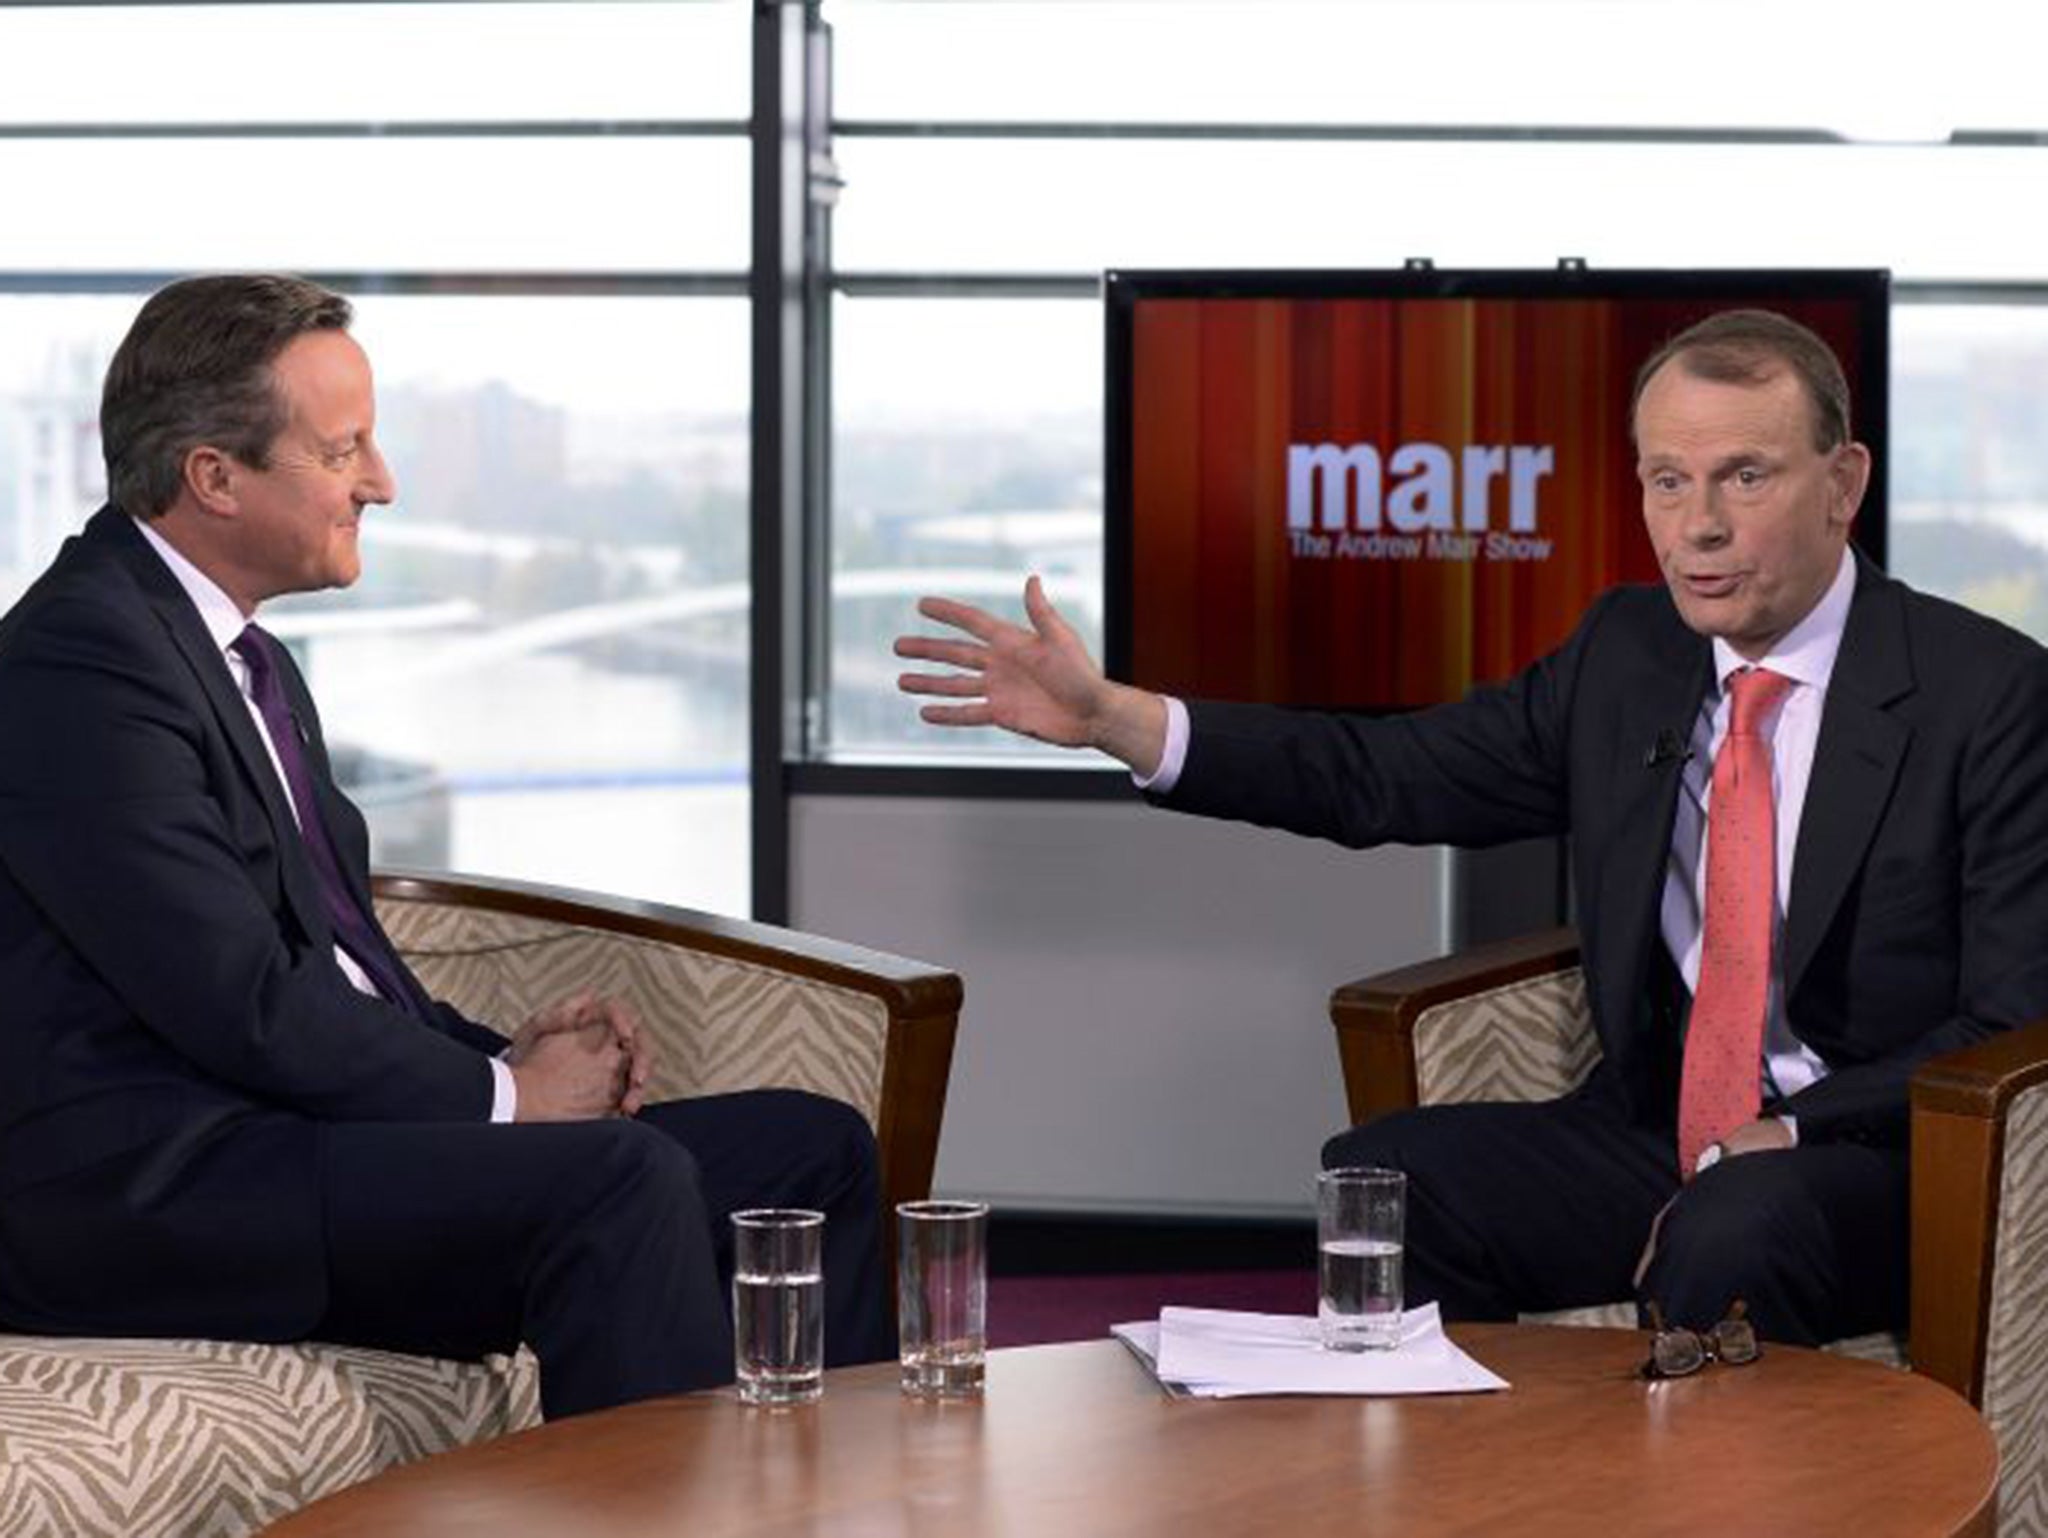 Andrew Marr interviews PM David Cameron on the Andrew Marr show on 4 October 2015